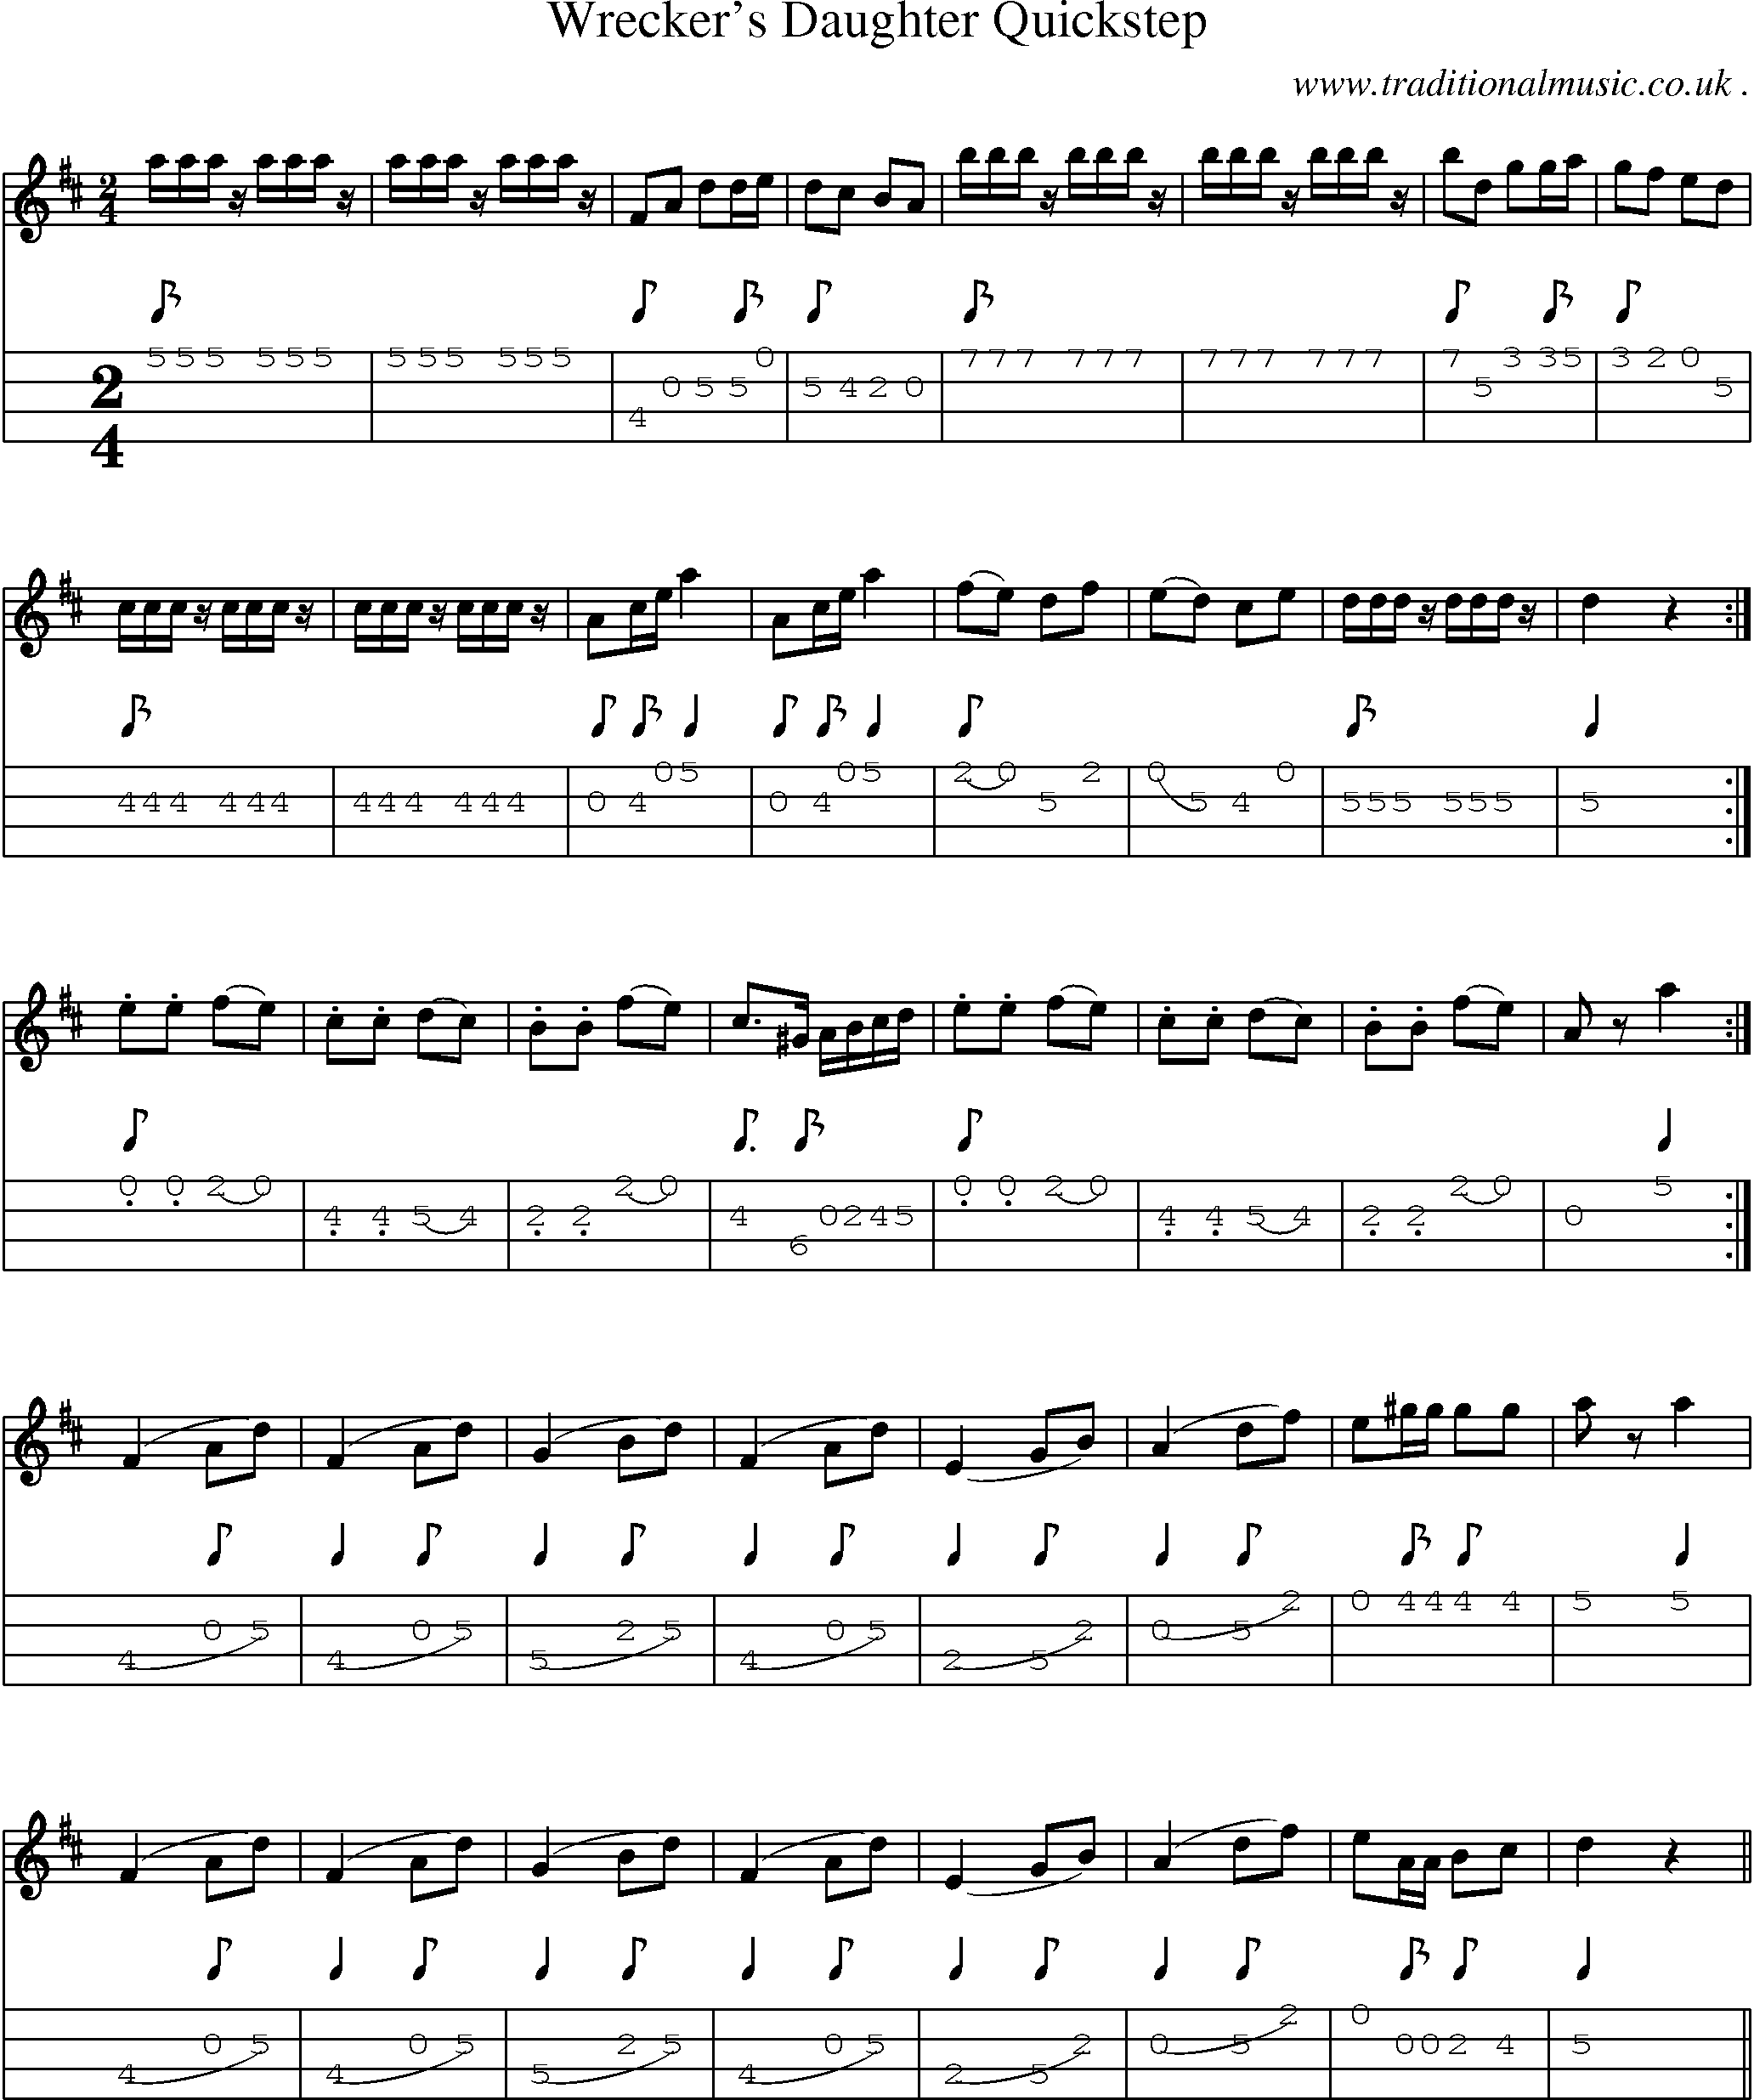 Sheet-Music and Mandolin Tabs for Wreckers Daughter Quickstep